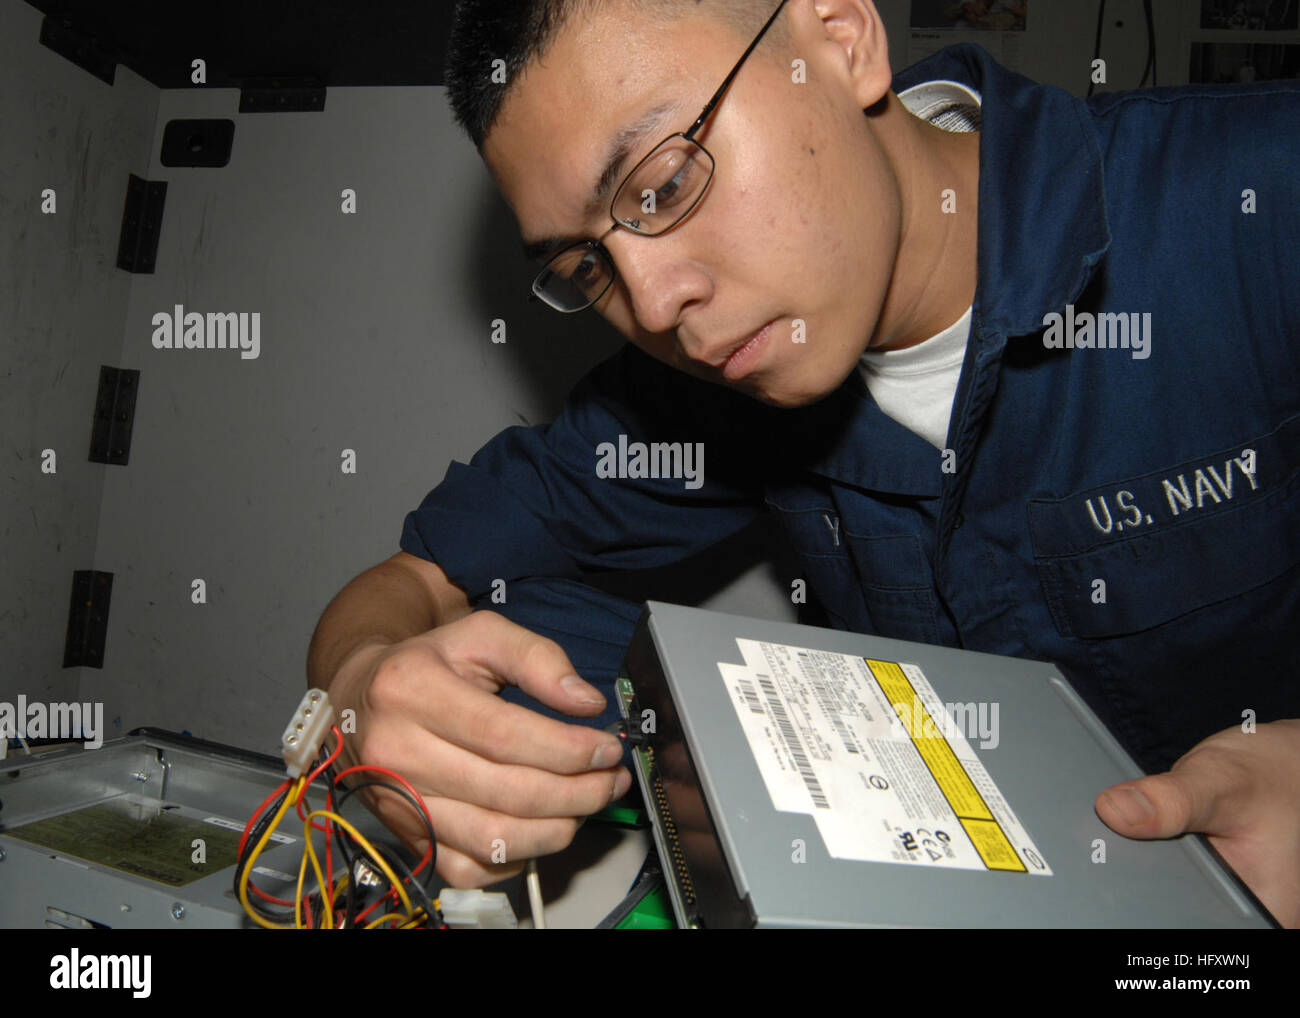 091028-N-5712P-015 ATLANTIC OCEAN (Oct. 28, 2009) Information Systems Technician Seaman Apprentice Miles Yu, assigned to the amphibious assault ship USS Nassau (LHA 4), replaces a CD-ROM drive. (U.S. Navy photo by Mass Communications Specialist 3rd Class Jonathan Pankau/Released) US Navy 091028-N-5712P-015 Information Systems Technician Seaman Apprentice Miles Yu, assigned to the amphibious assault ship USS Nassau (LHA 4) Stock Photo